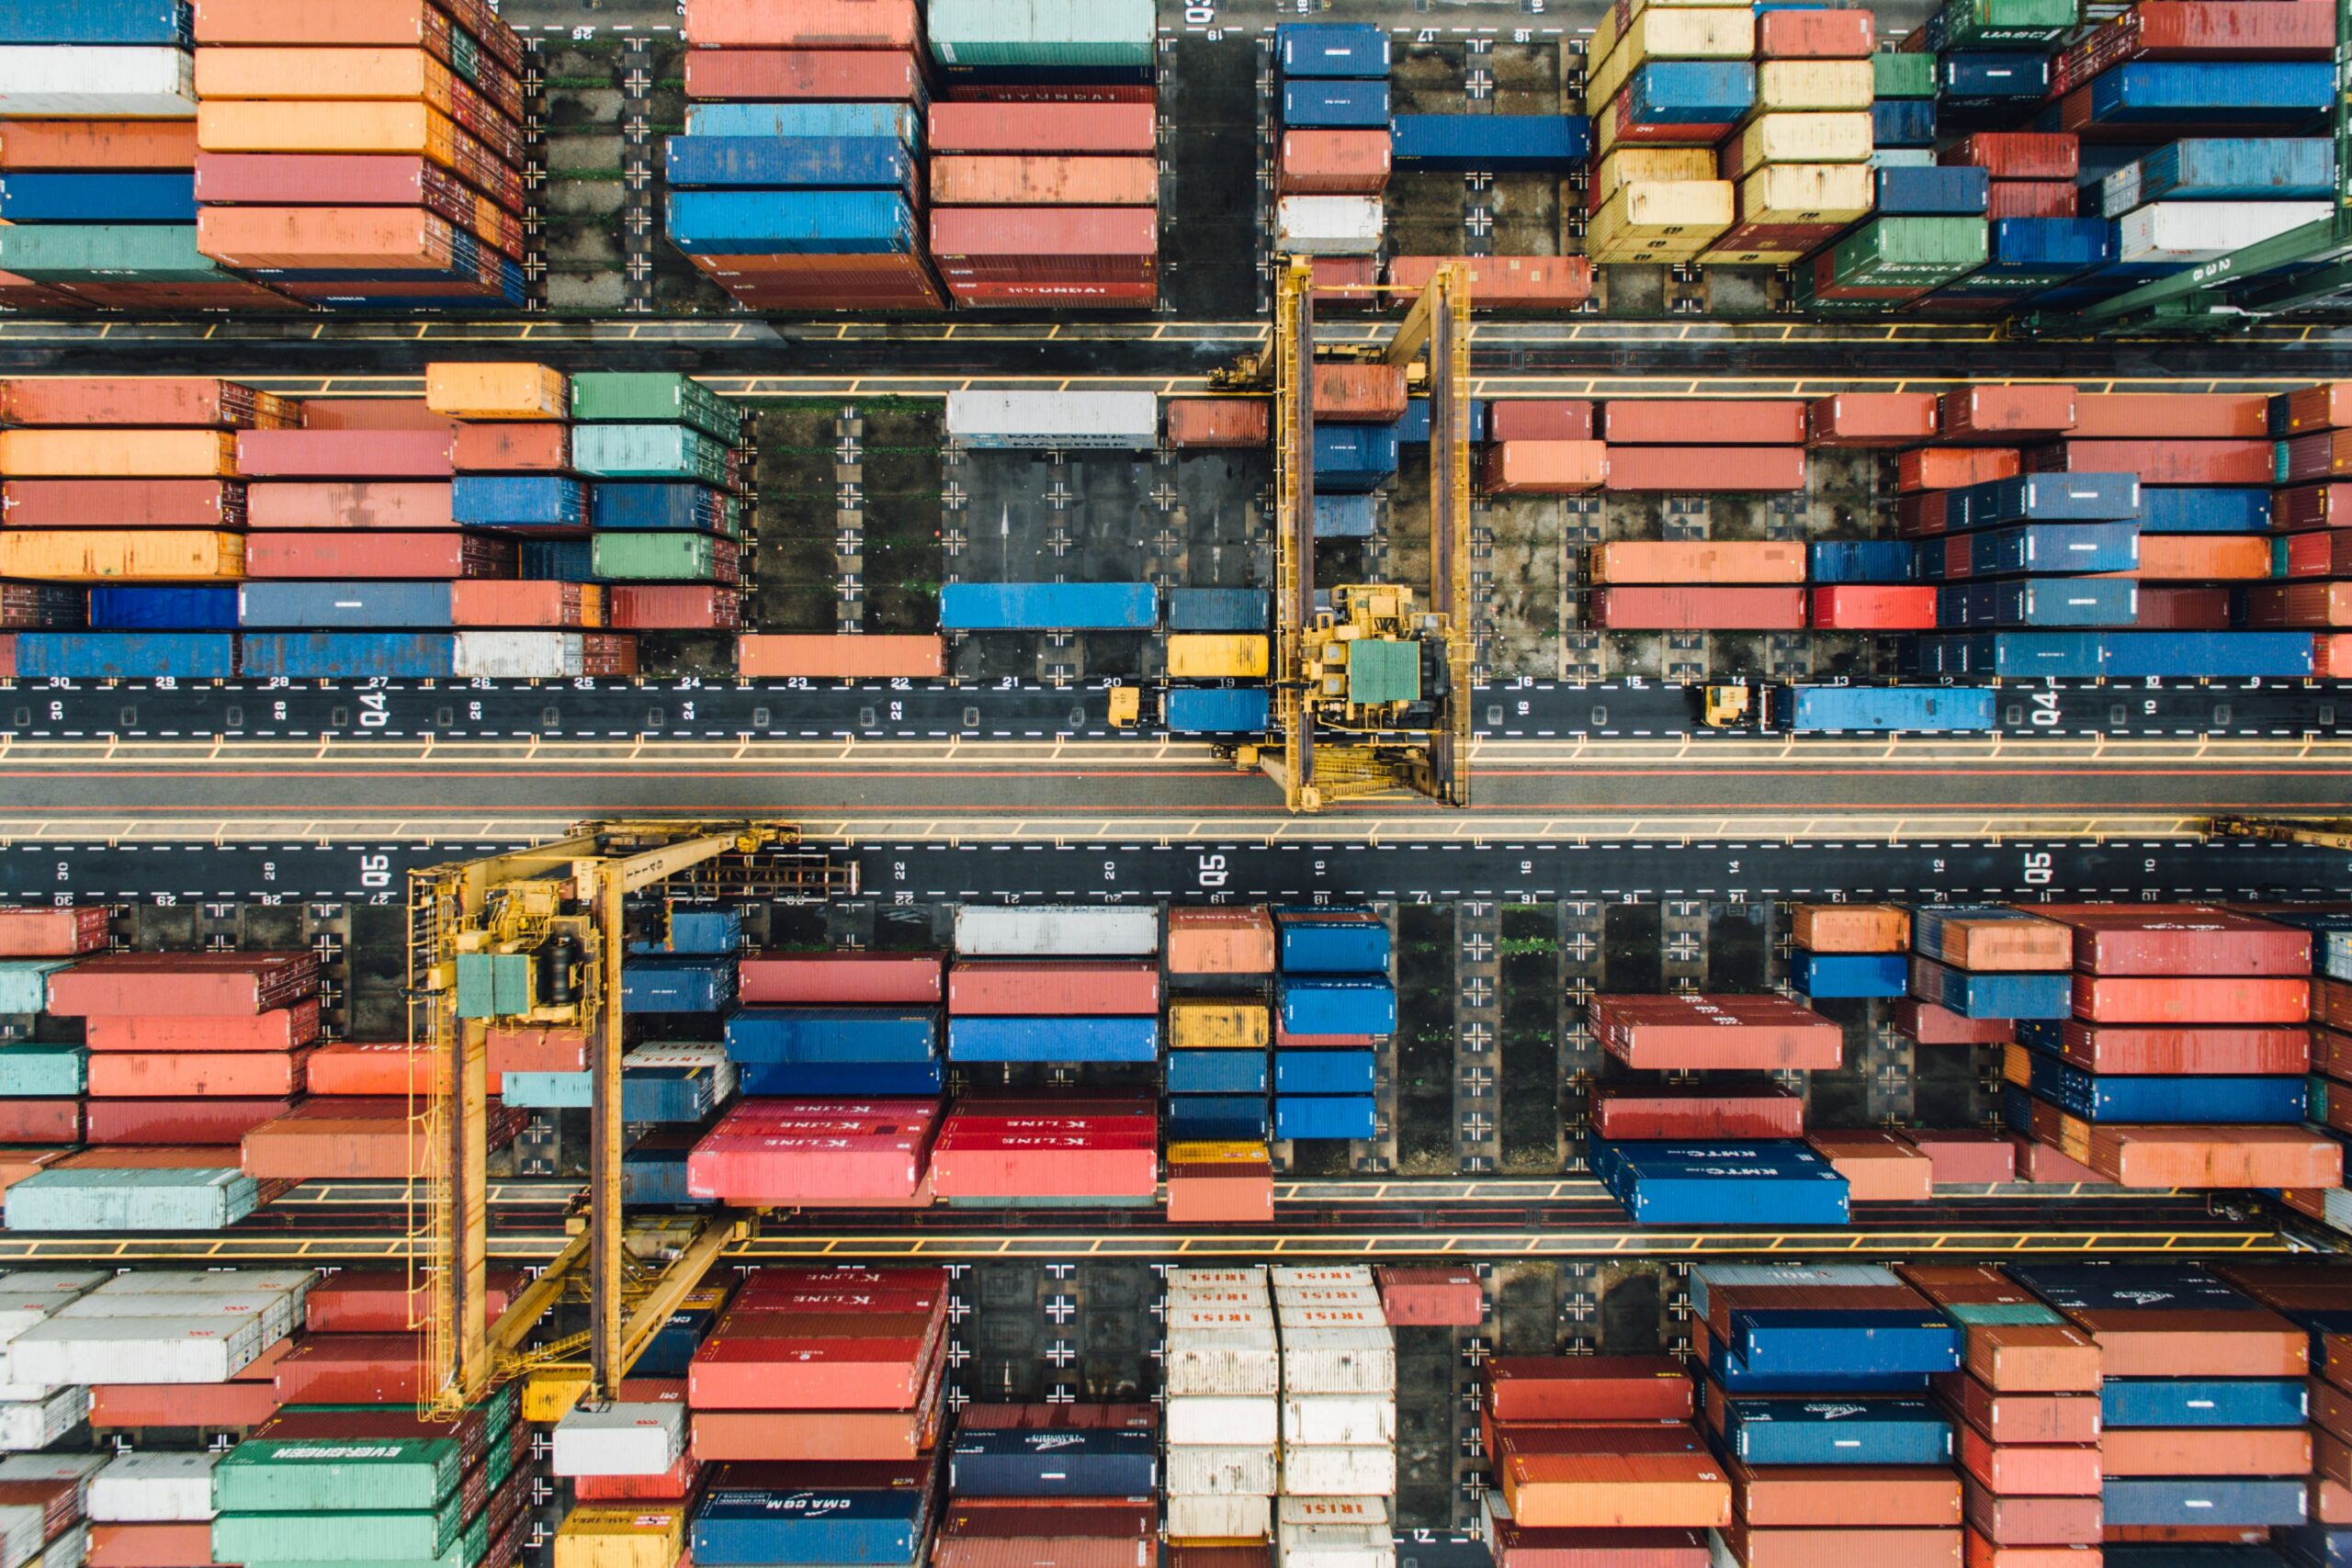 Aerial shot of many shipping containers of different sizes and colours standing in a depot/shipping yard